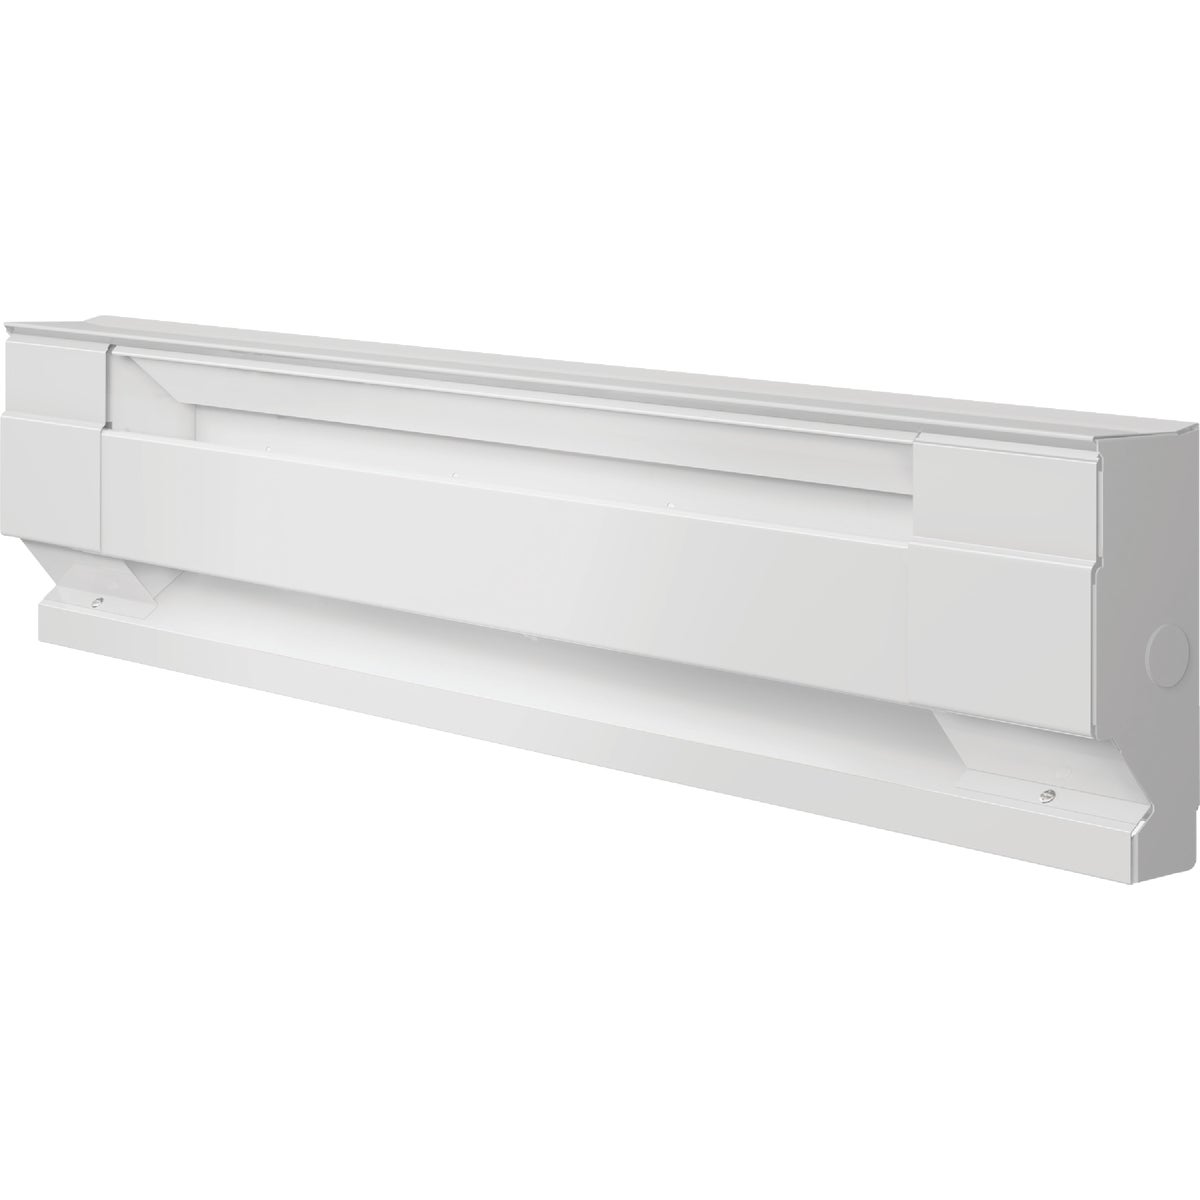 Item 458864, Cadet electric baseboard heaters are a simple and economical way to add 